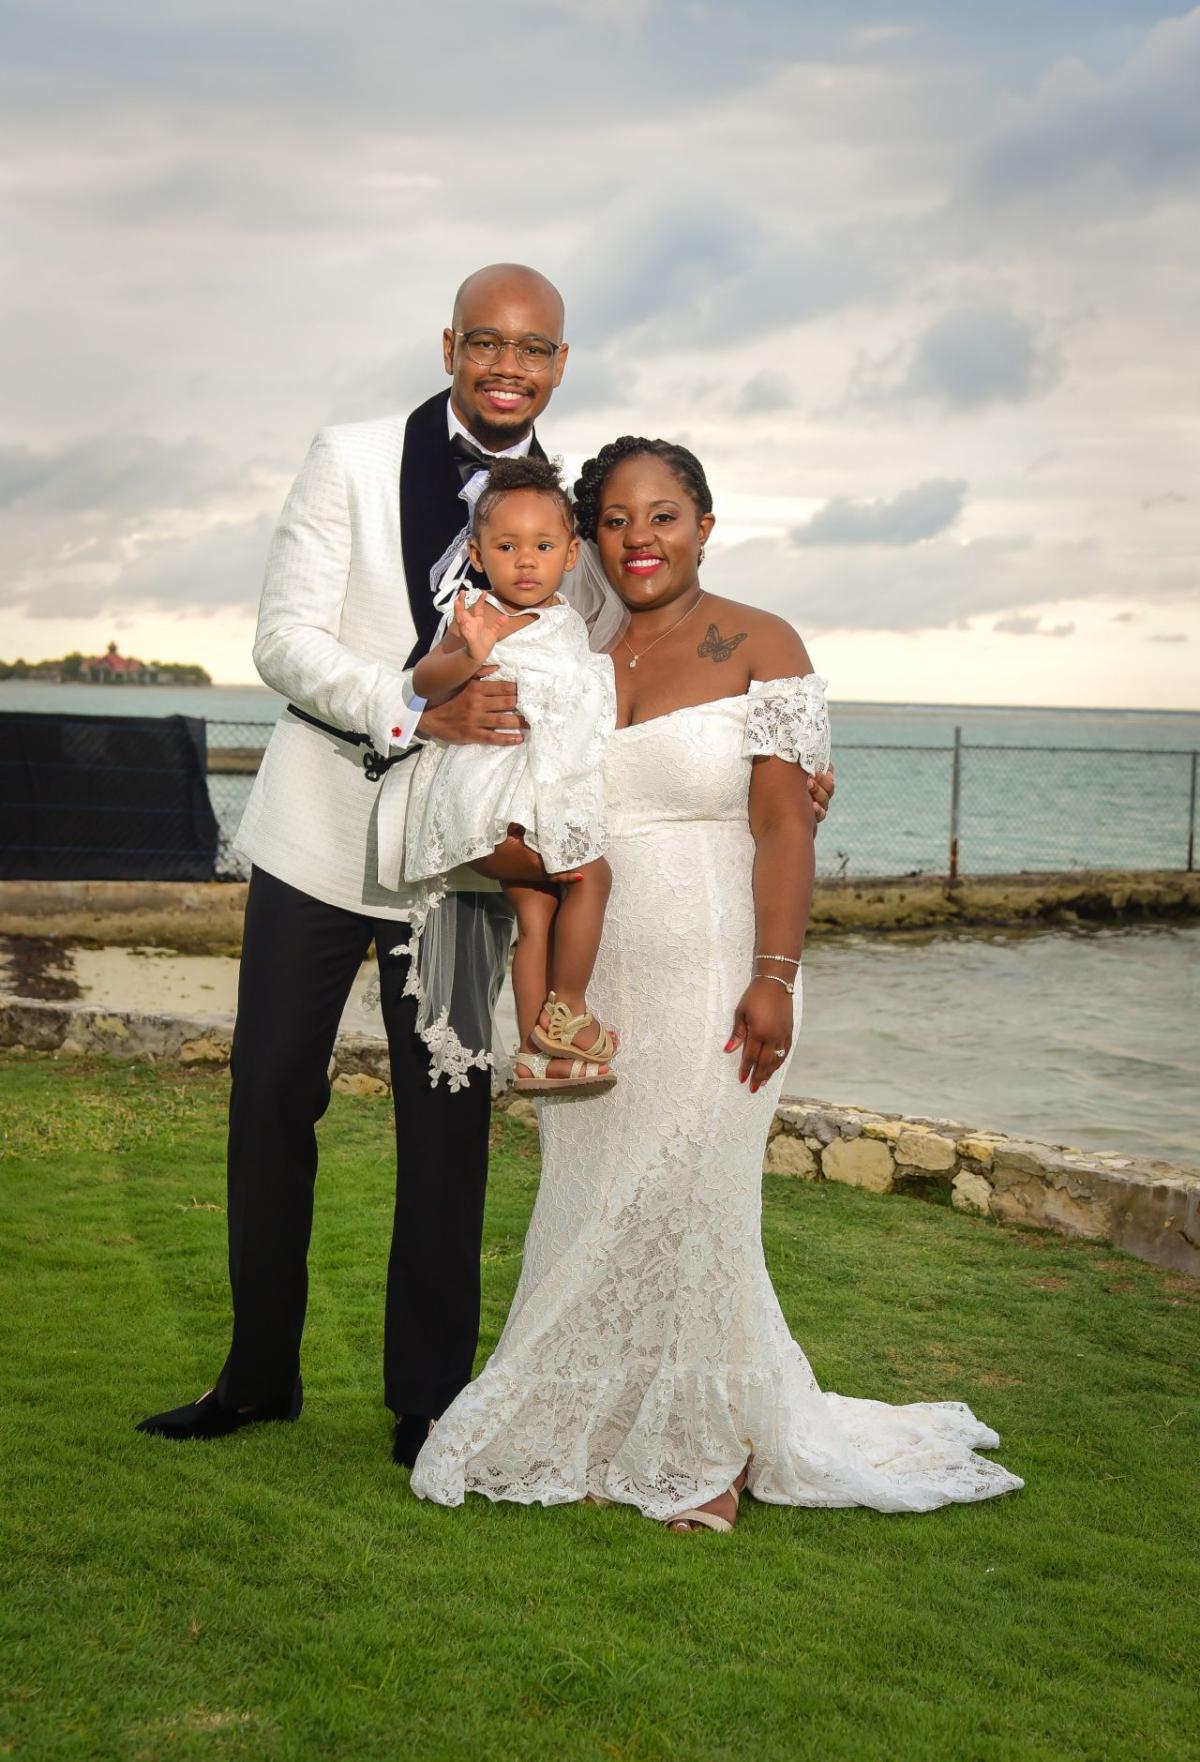 Dexter Thompson and family in wedding attire.